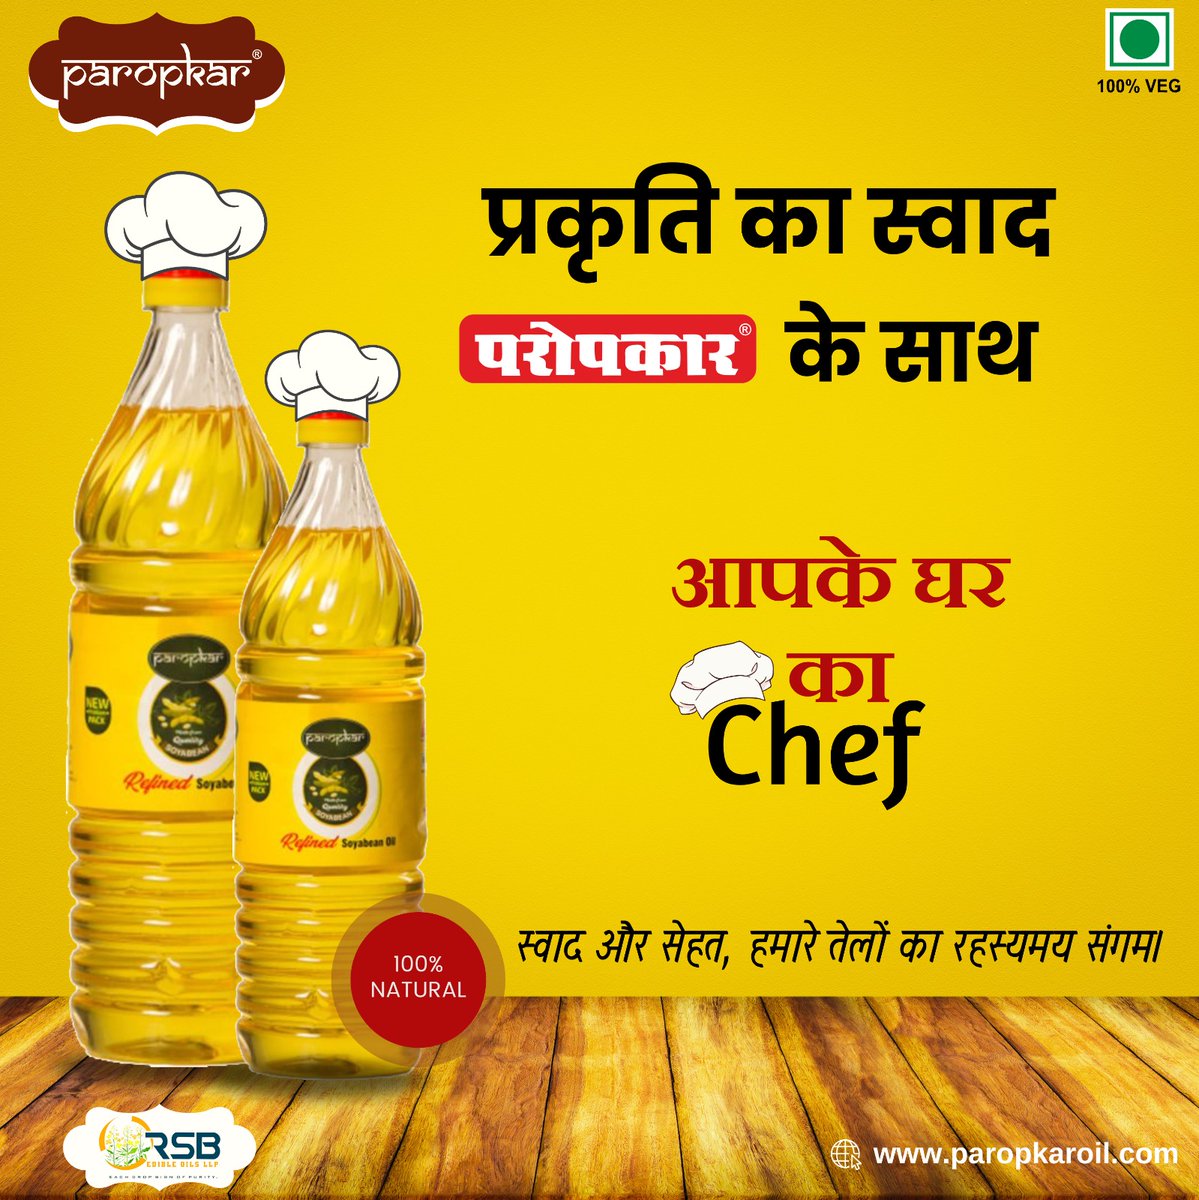 Elevate your cooking with Paropkar oil, a kitchen essential for flavor perfection.
.
.
.
#CookingEssentials #FlavorfulMeals #HealthyCooking #KitchenMustHaves #CulinaryMagic #GourmetCooking #CookingInspiration #TastyCreations #NutritionBoost #FoodieFuels #CookingWithLove